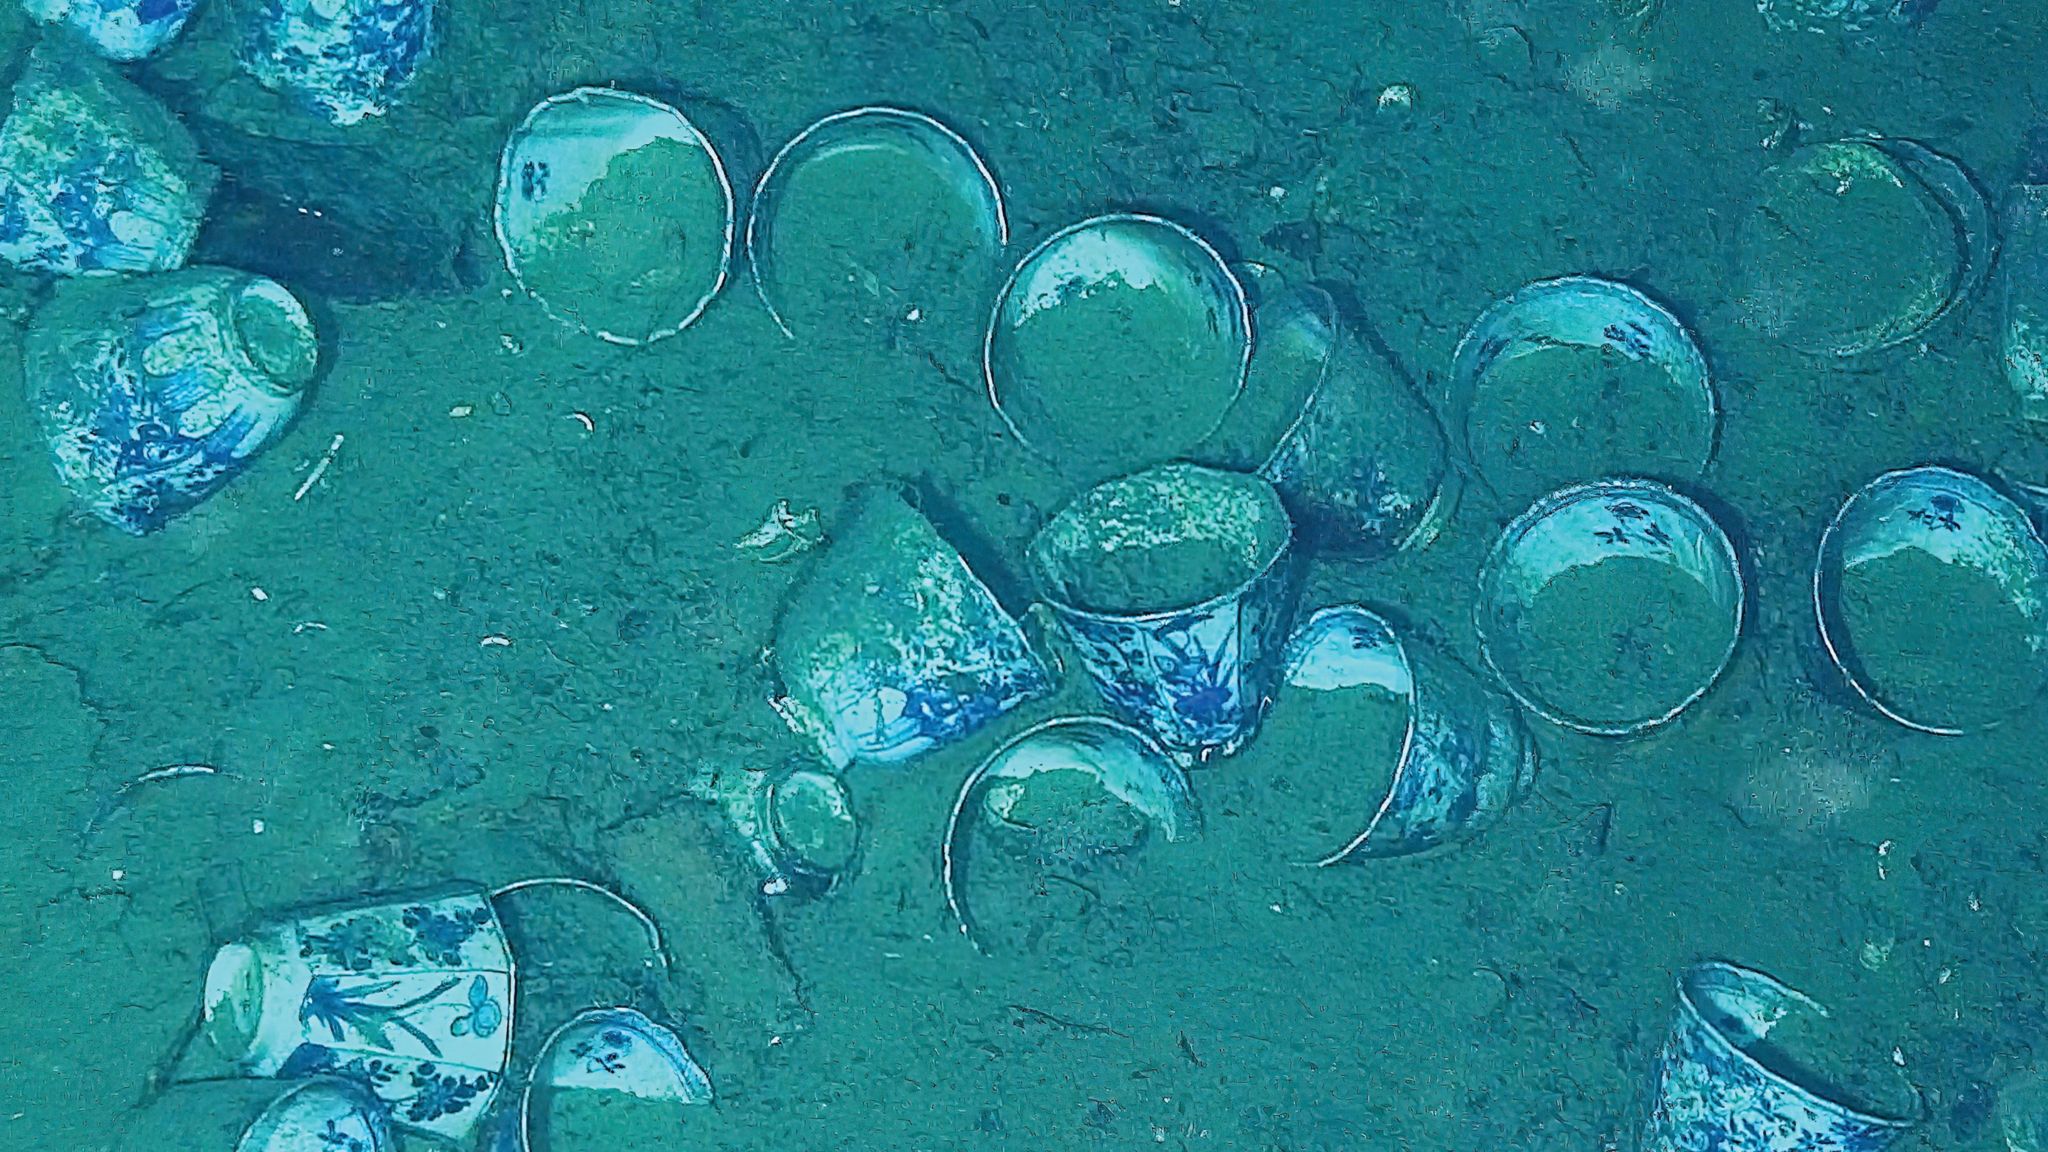 Porcelain cups, part of the San Jose shipwreck, are seen on the seabed in the Carribean Sea.